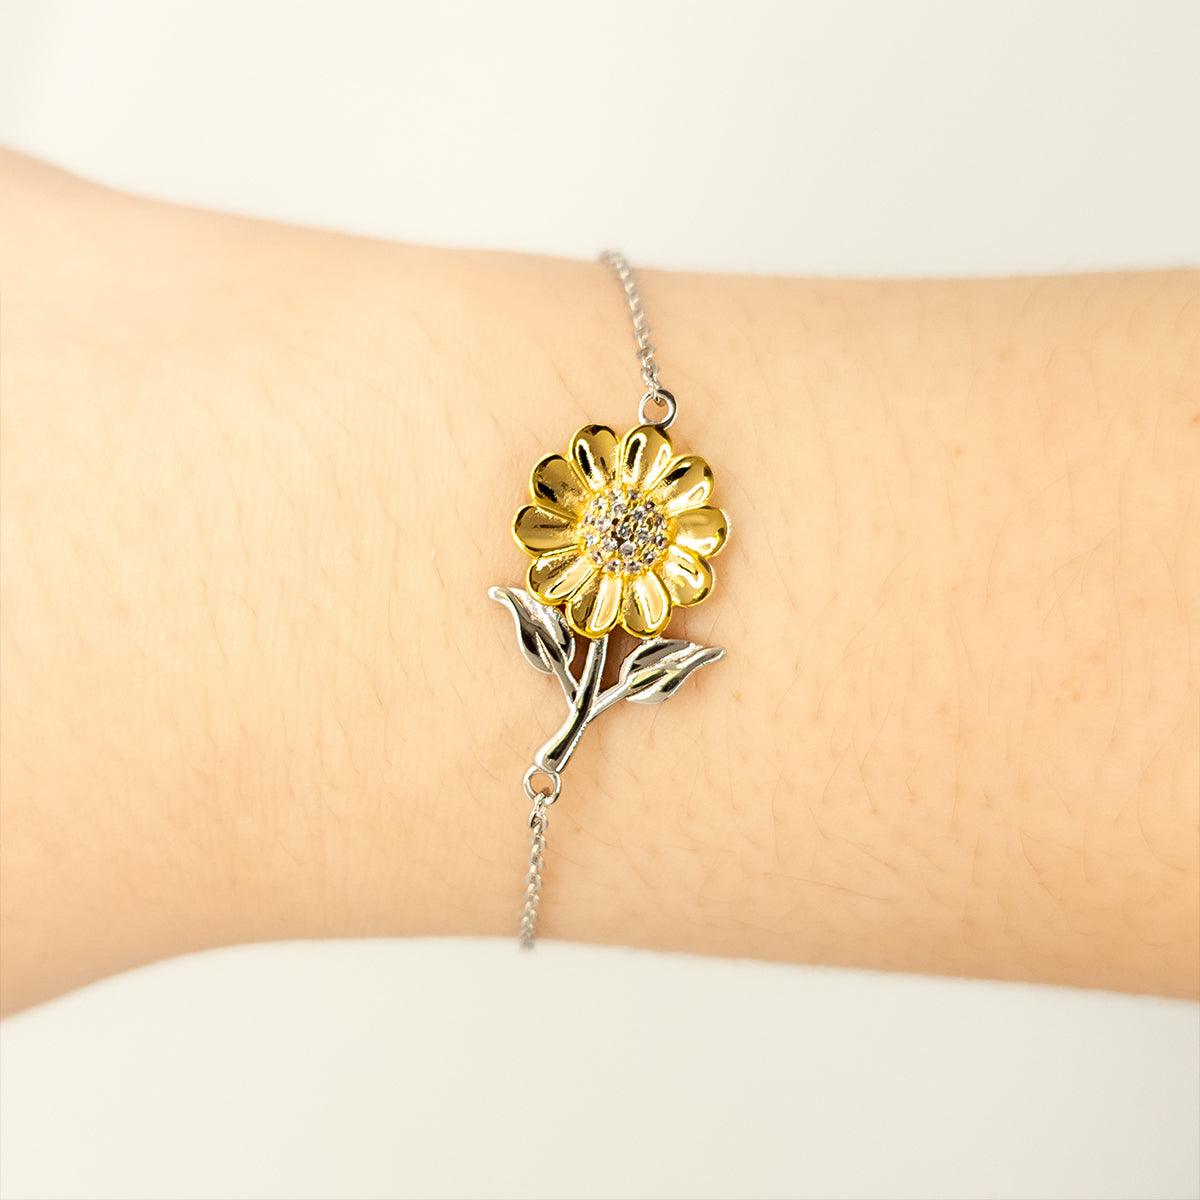 Remarkable Administrative Assistant Gifts, Your dedication and hard work, Inspirational Birthday Christmas Unique Sunflower Bracelet For Administrative Assistant, Coworkers, Men, Women, Friends - Mallard Moon Gift Shop